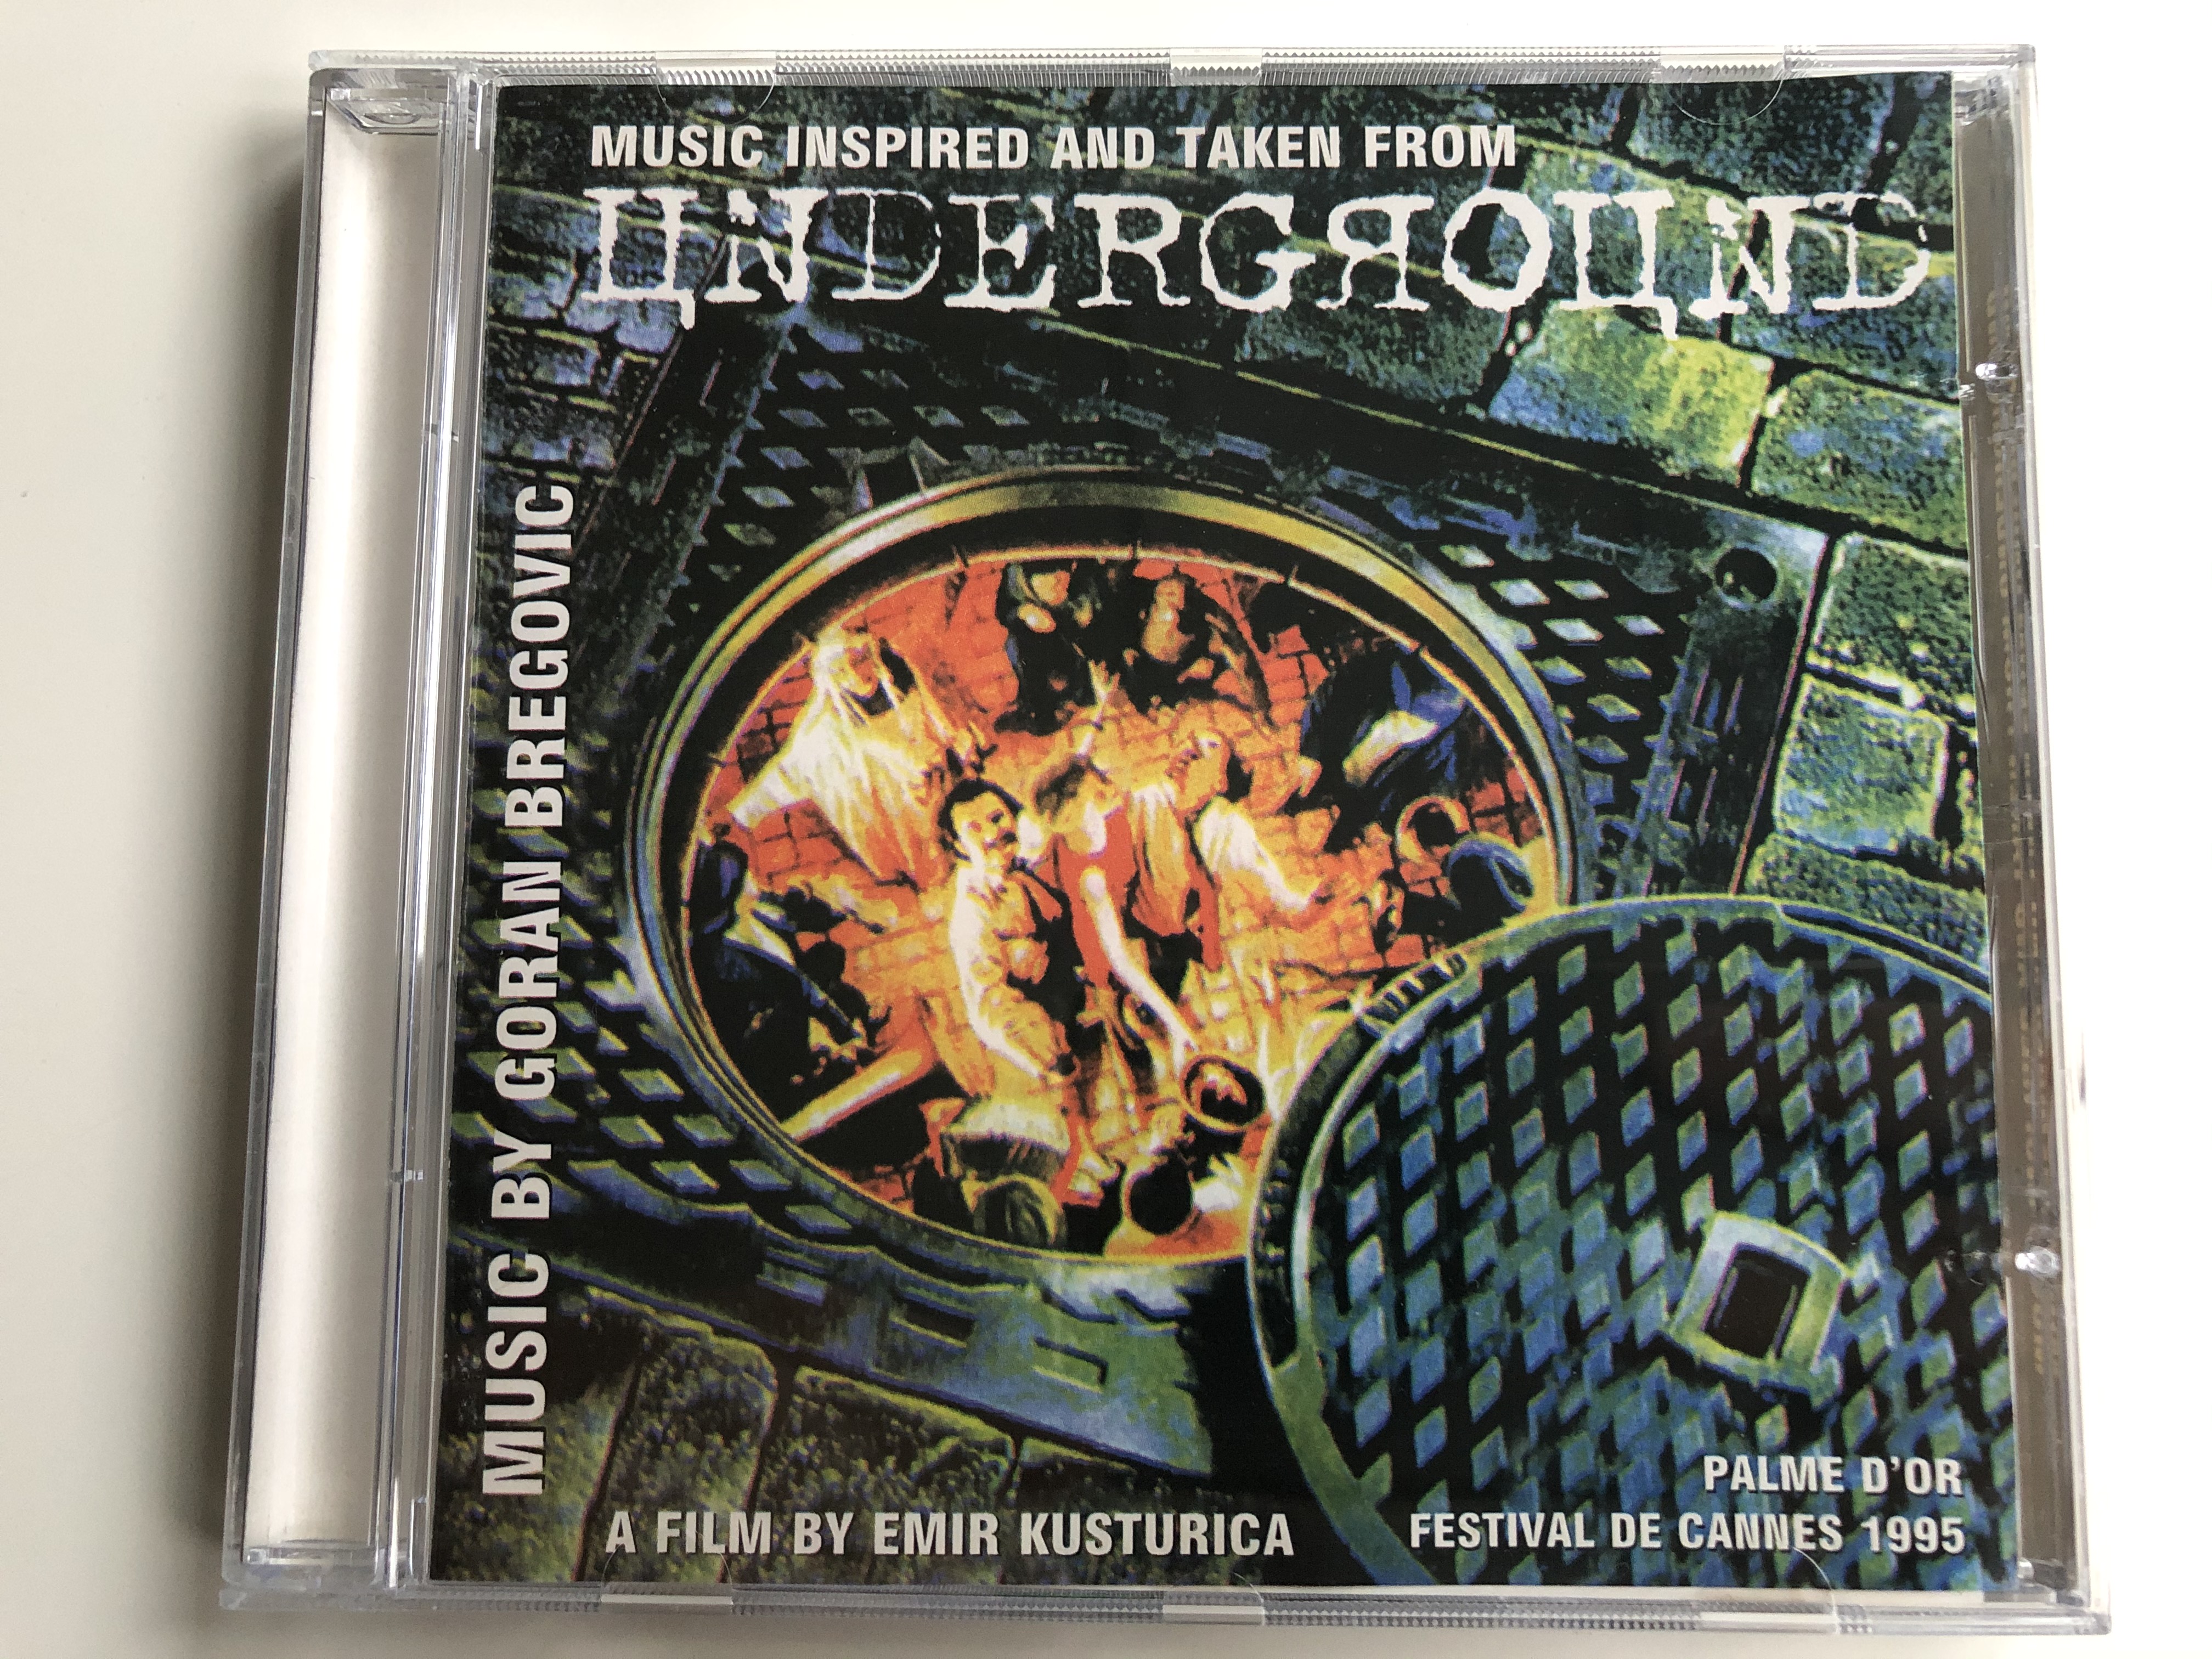 music-inspired-and-taken-from-underground-music-by-goran-bregovic-a-film-by-emir-kusturica-palme-d-or-festival-de-cannes-1995-mercury-audio-cd-1995-528-910-2-1-.jpg